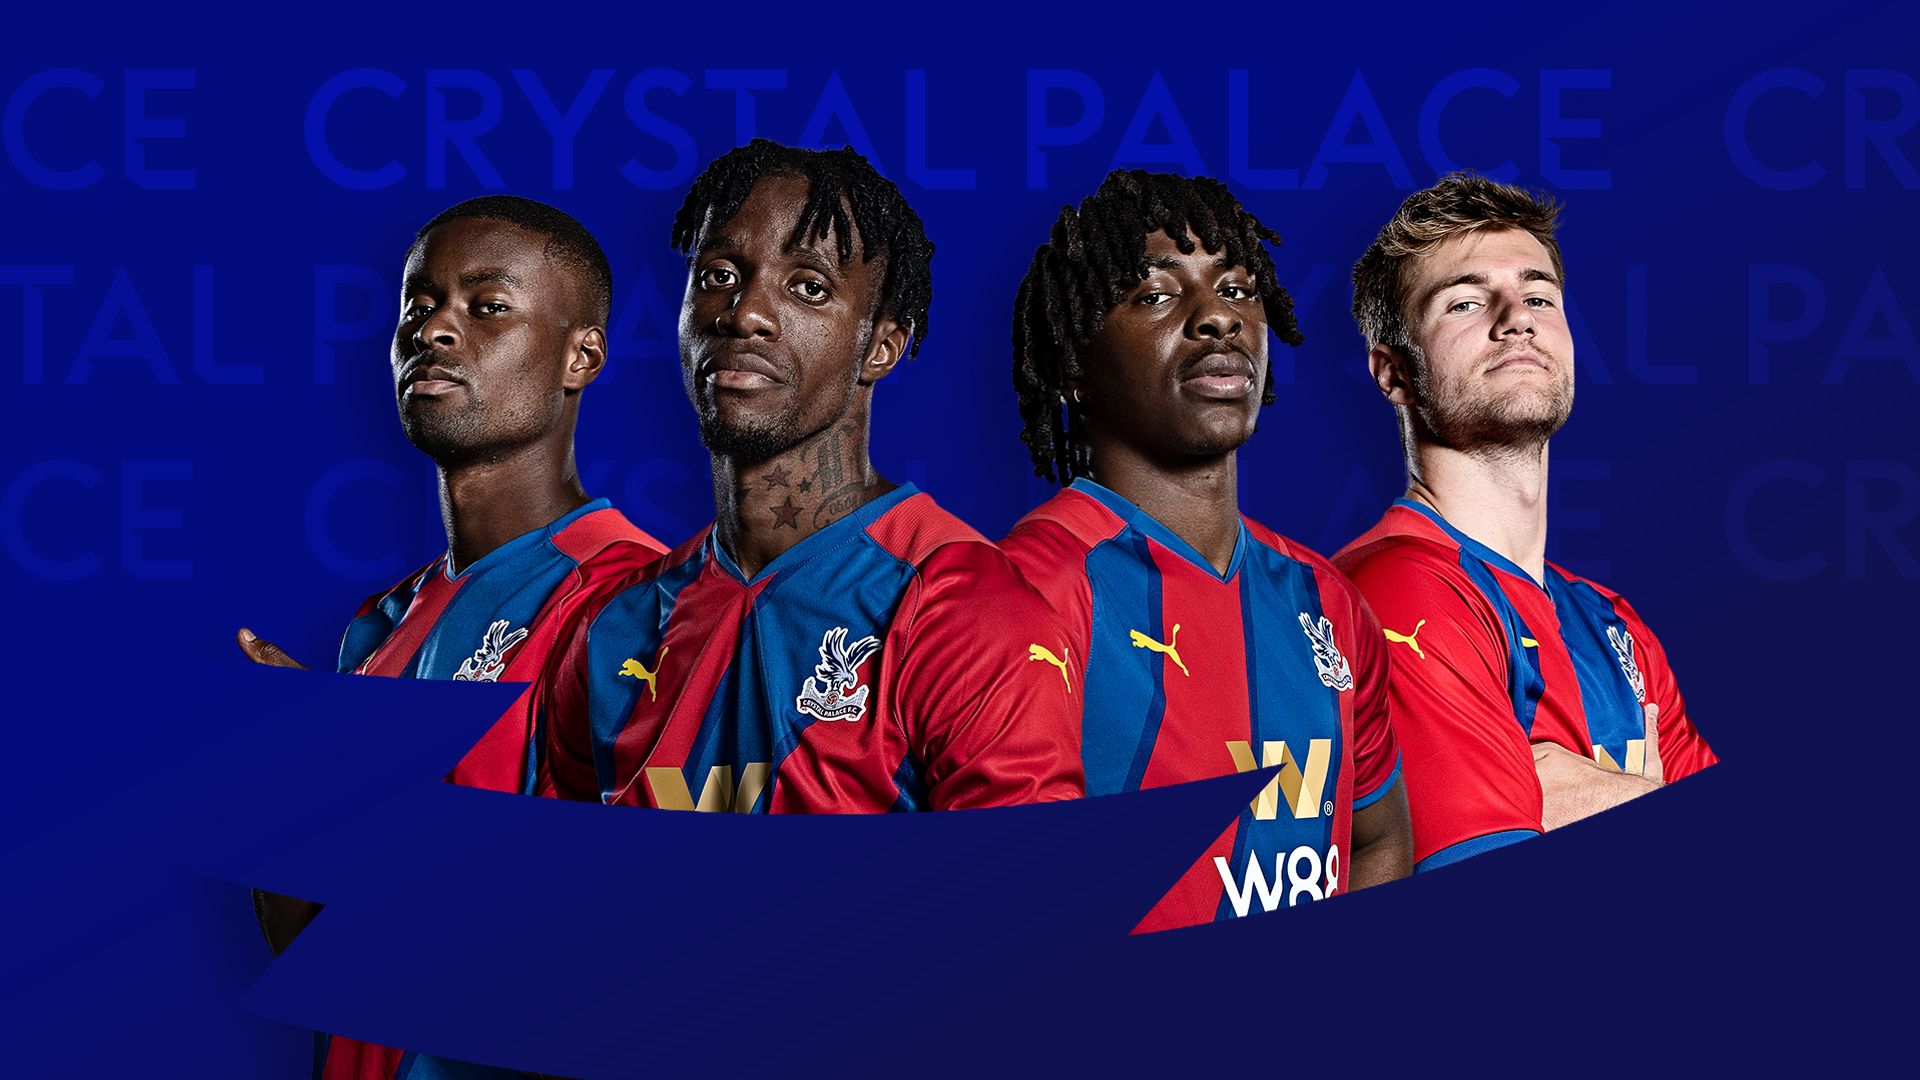 Crystal Palace fixtures: Arsenal, Liverpool first up